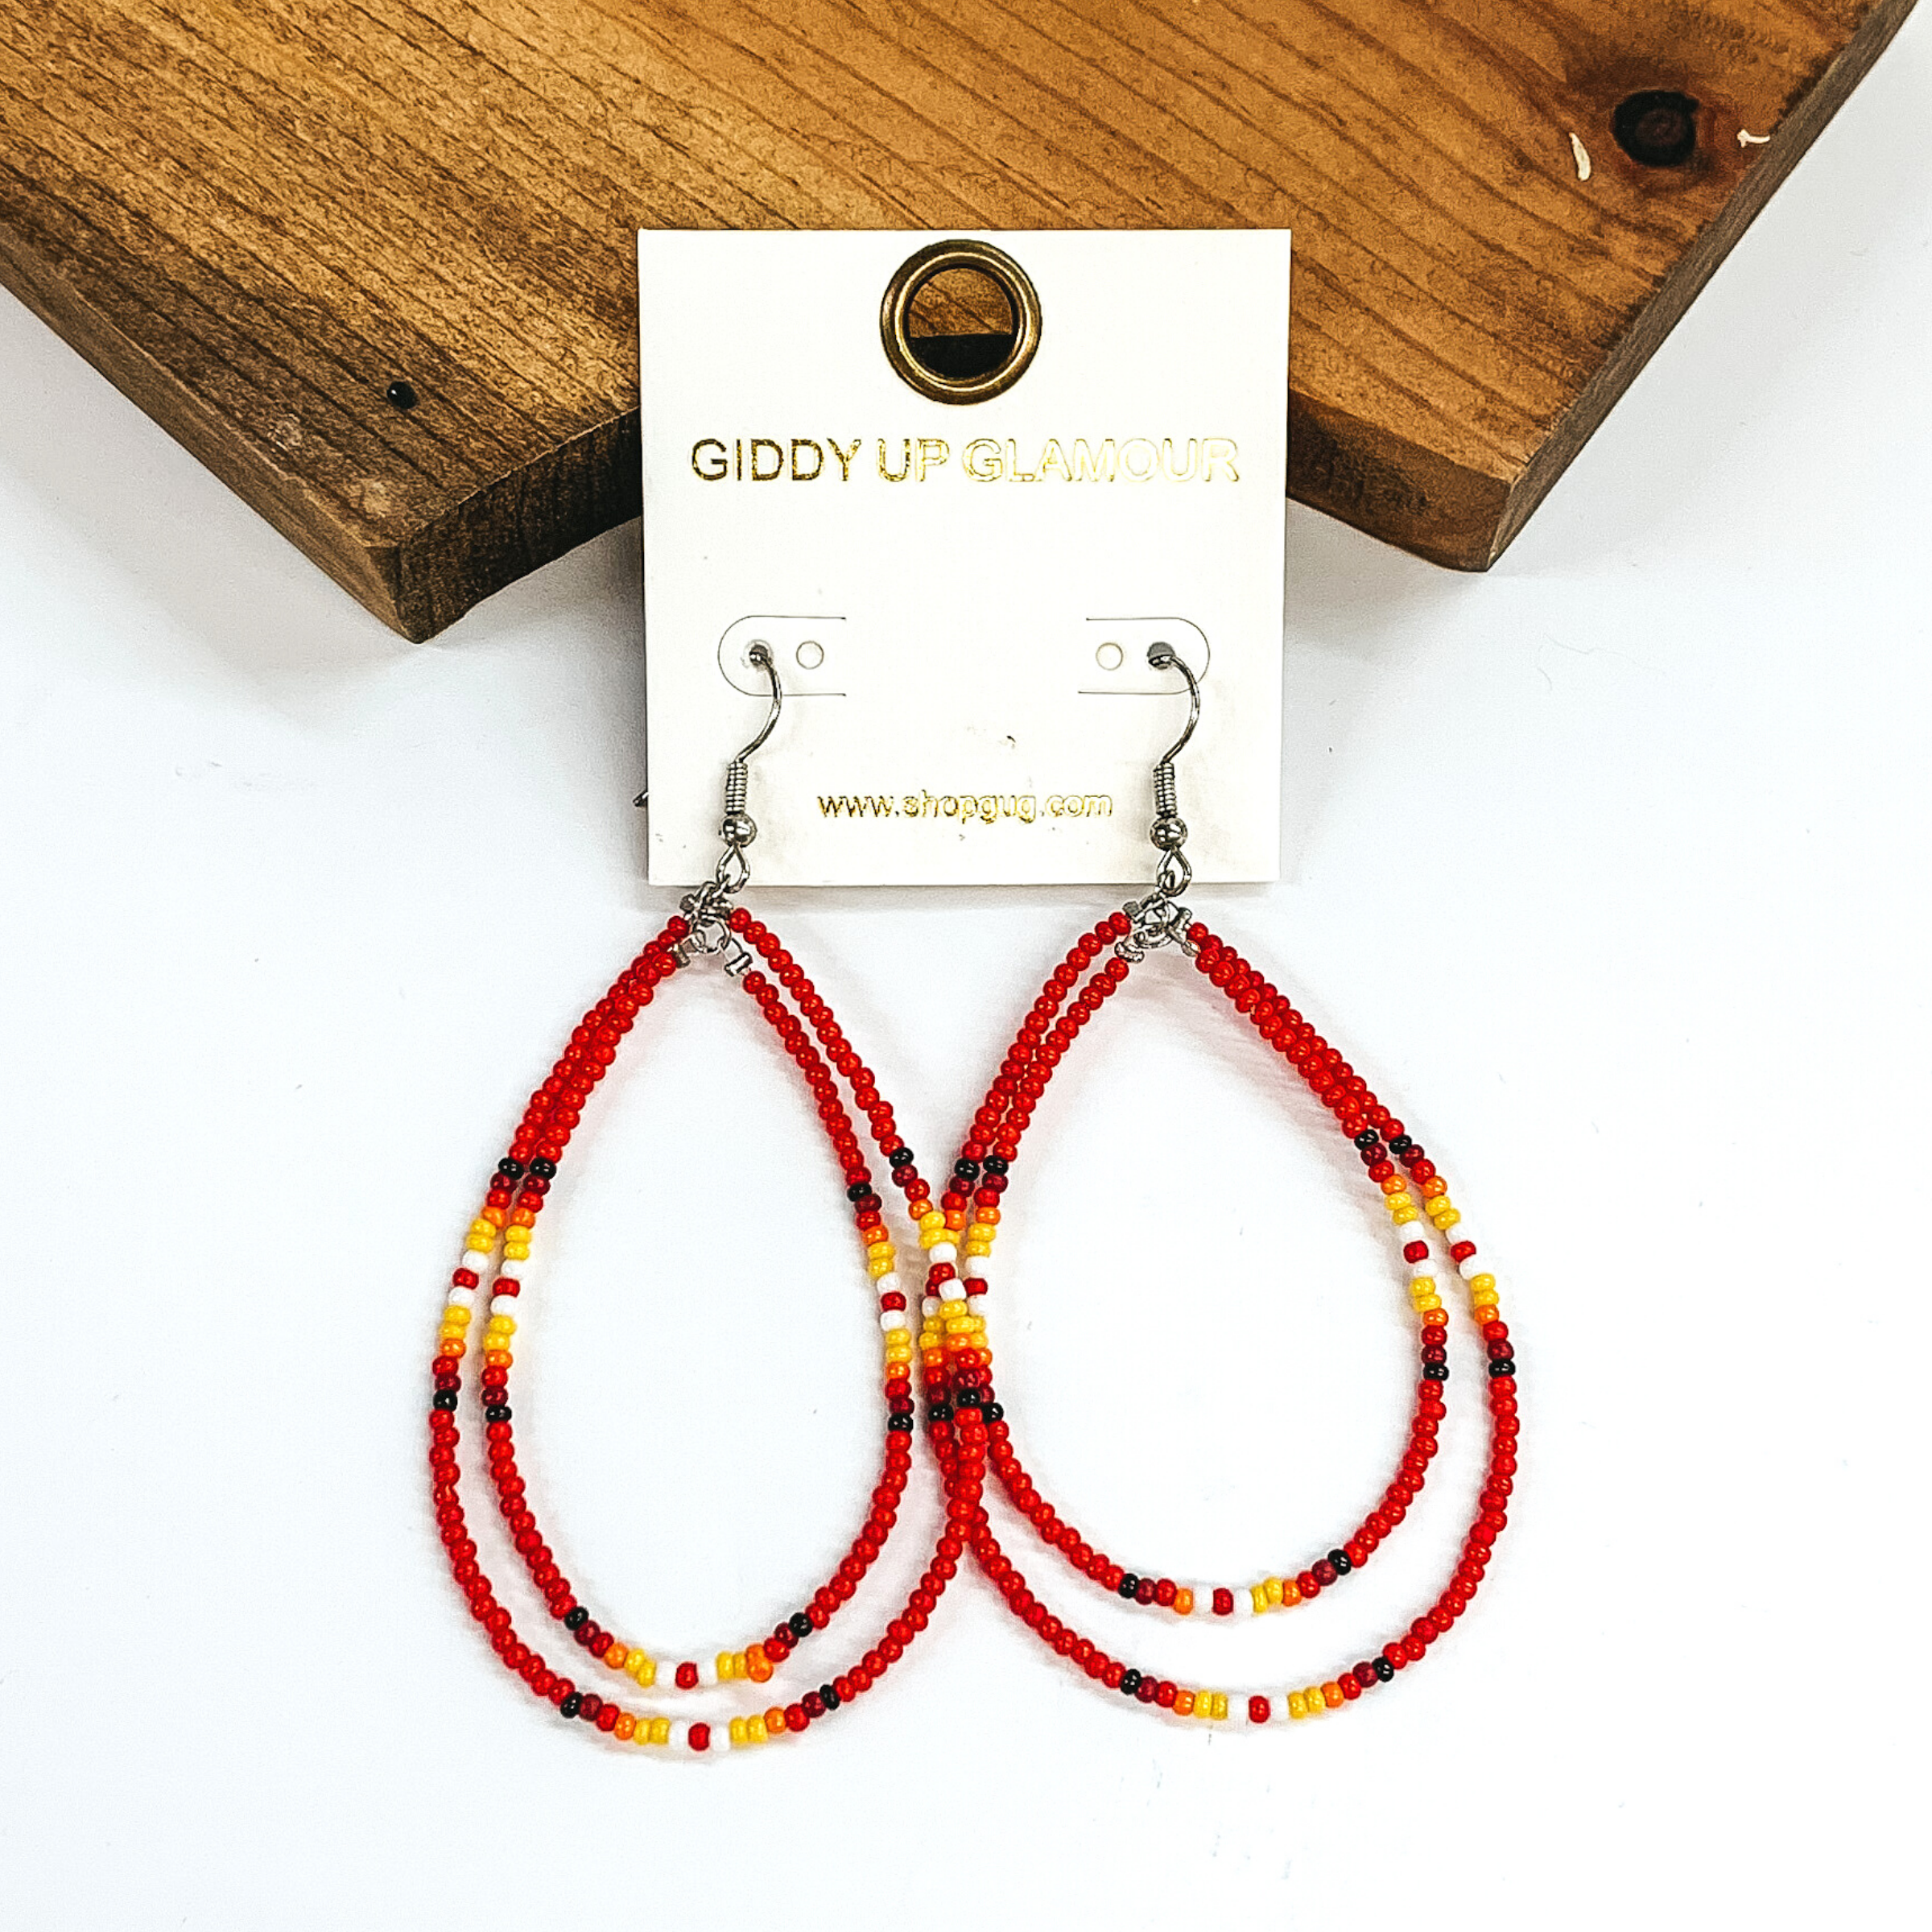 Double layered, hanging beaded teardrop earrings. The majority of the beads are red with three segements including maroon, red, yellow, white, and black beads. hese earrings are pictured on a white background in front of a dark piece of wood. 